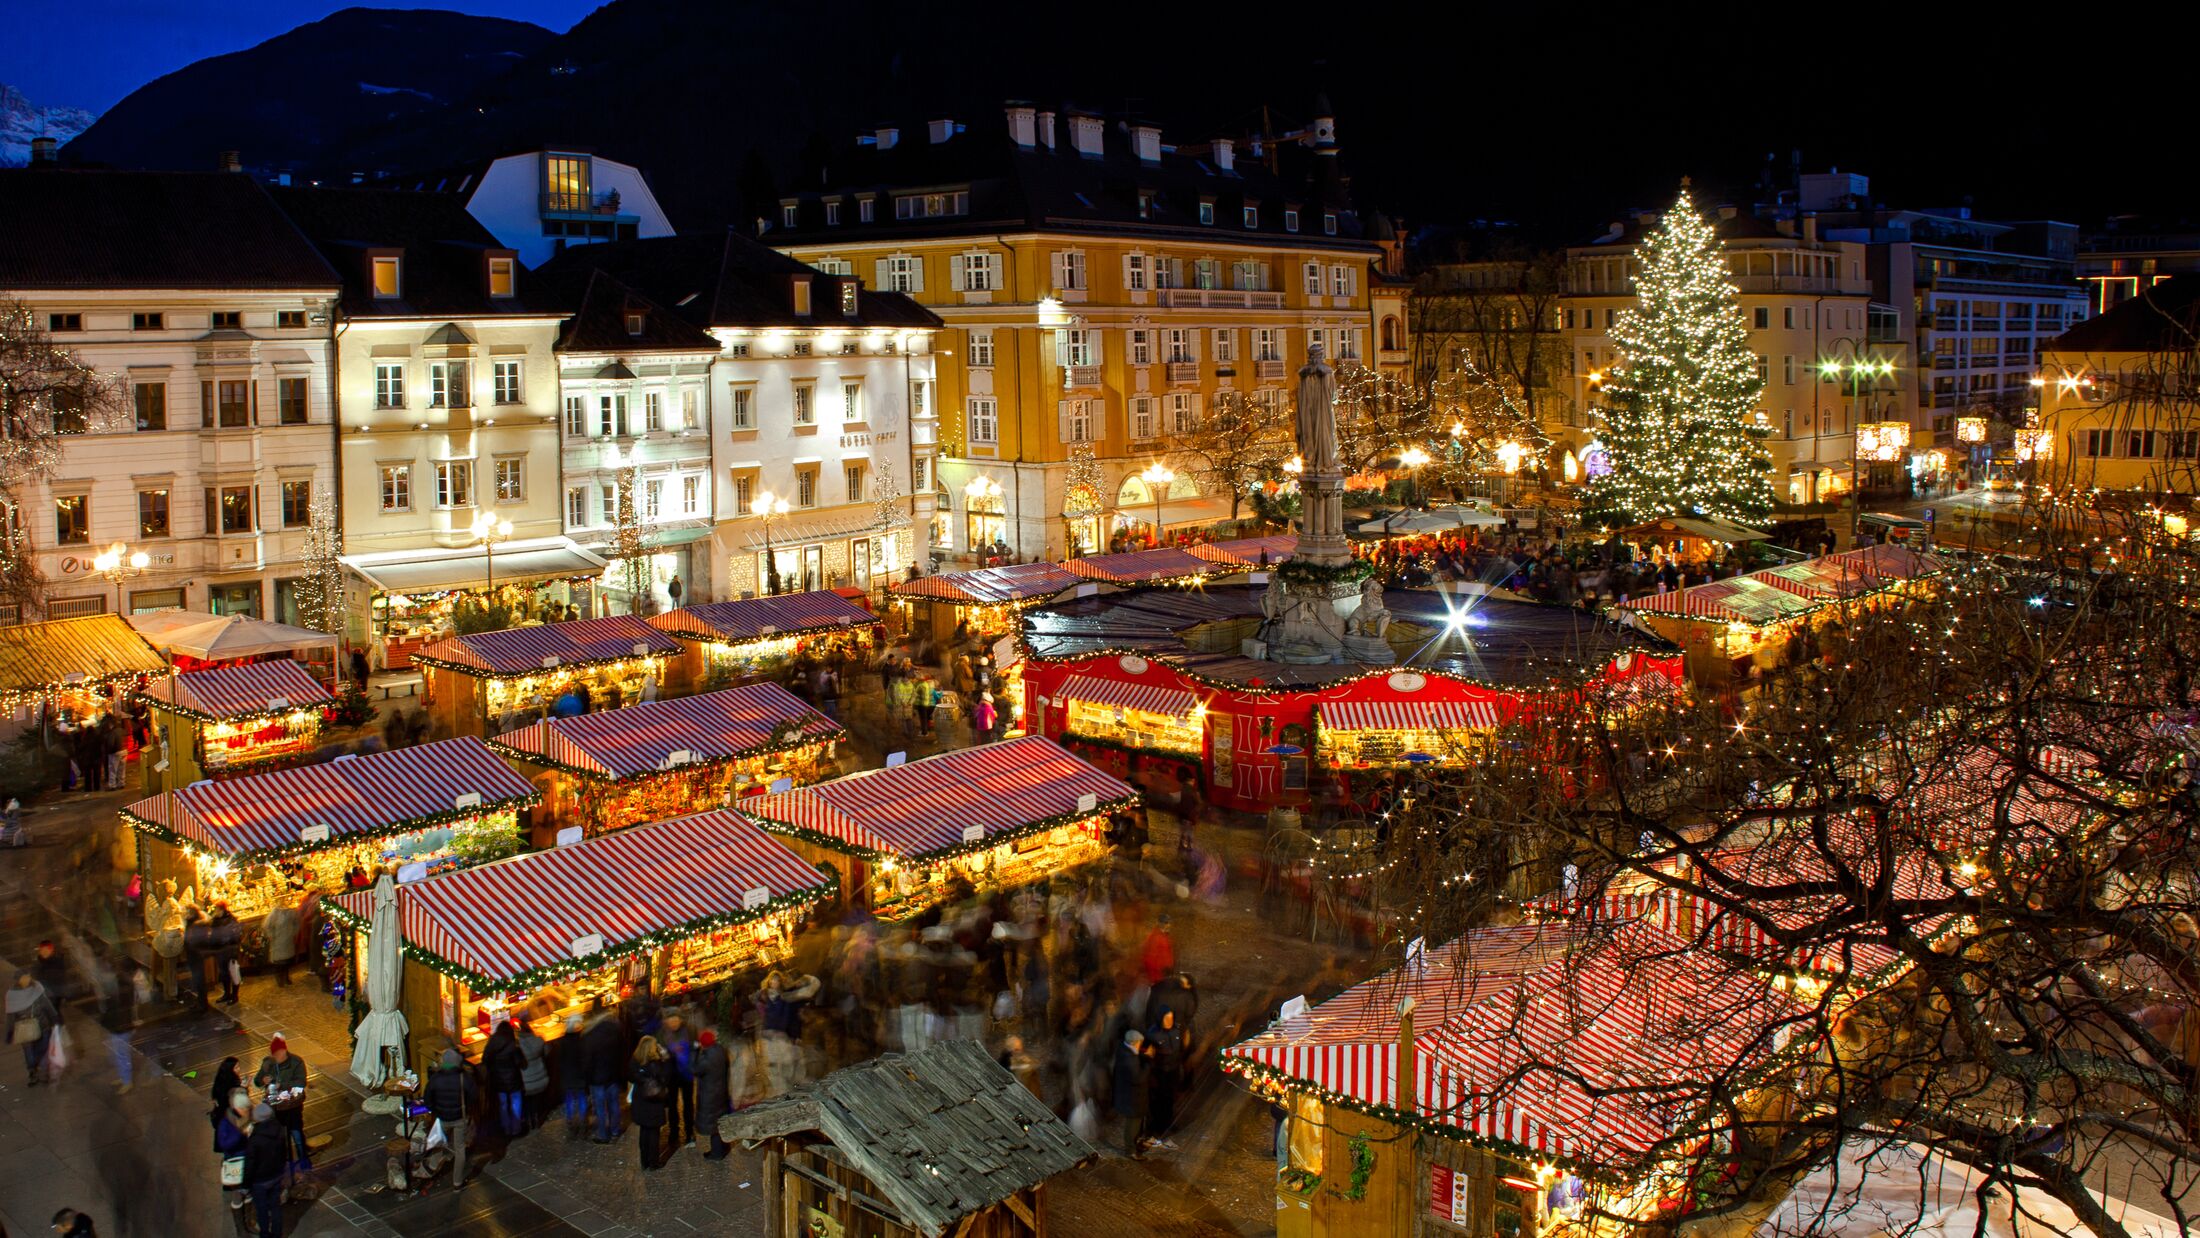 Christmas market in Bolzano with lights and decorations